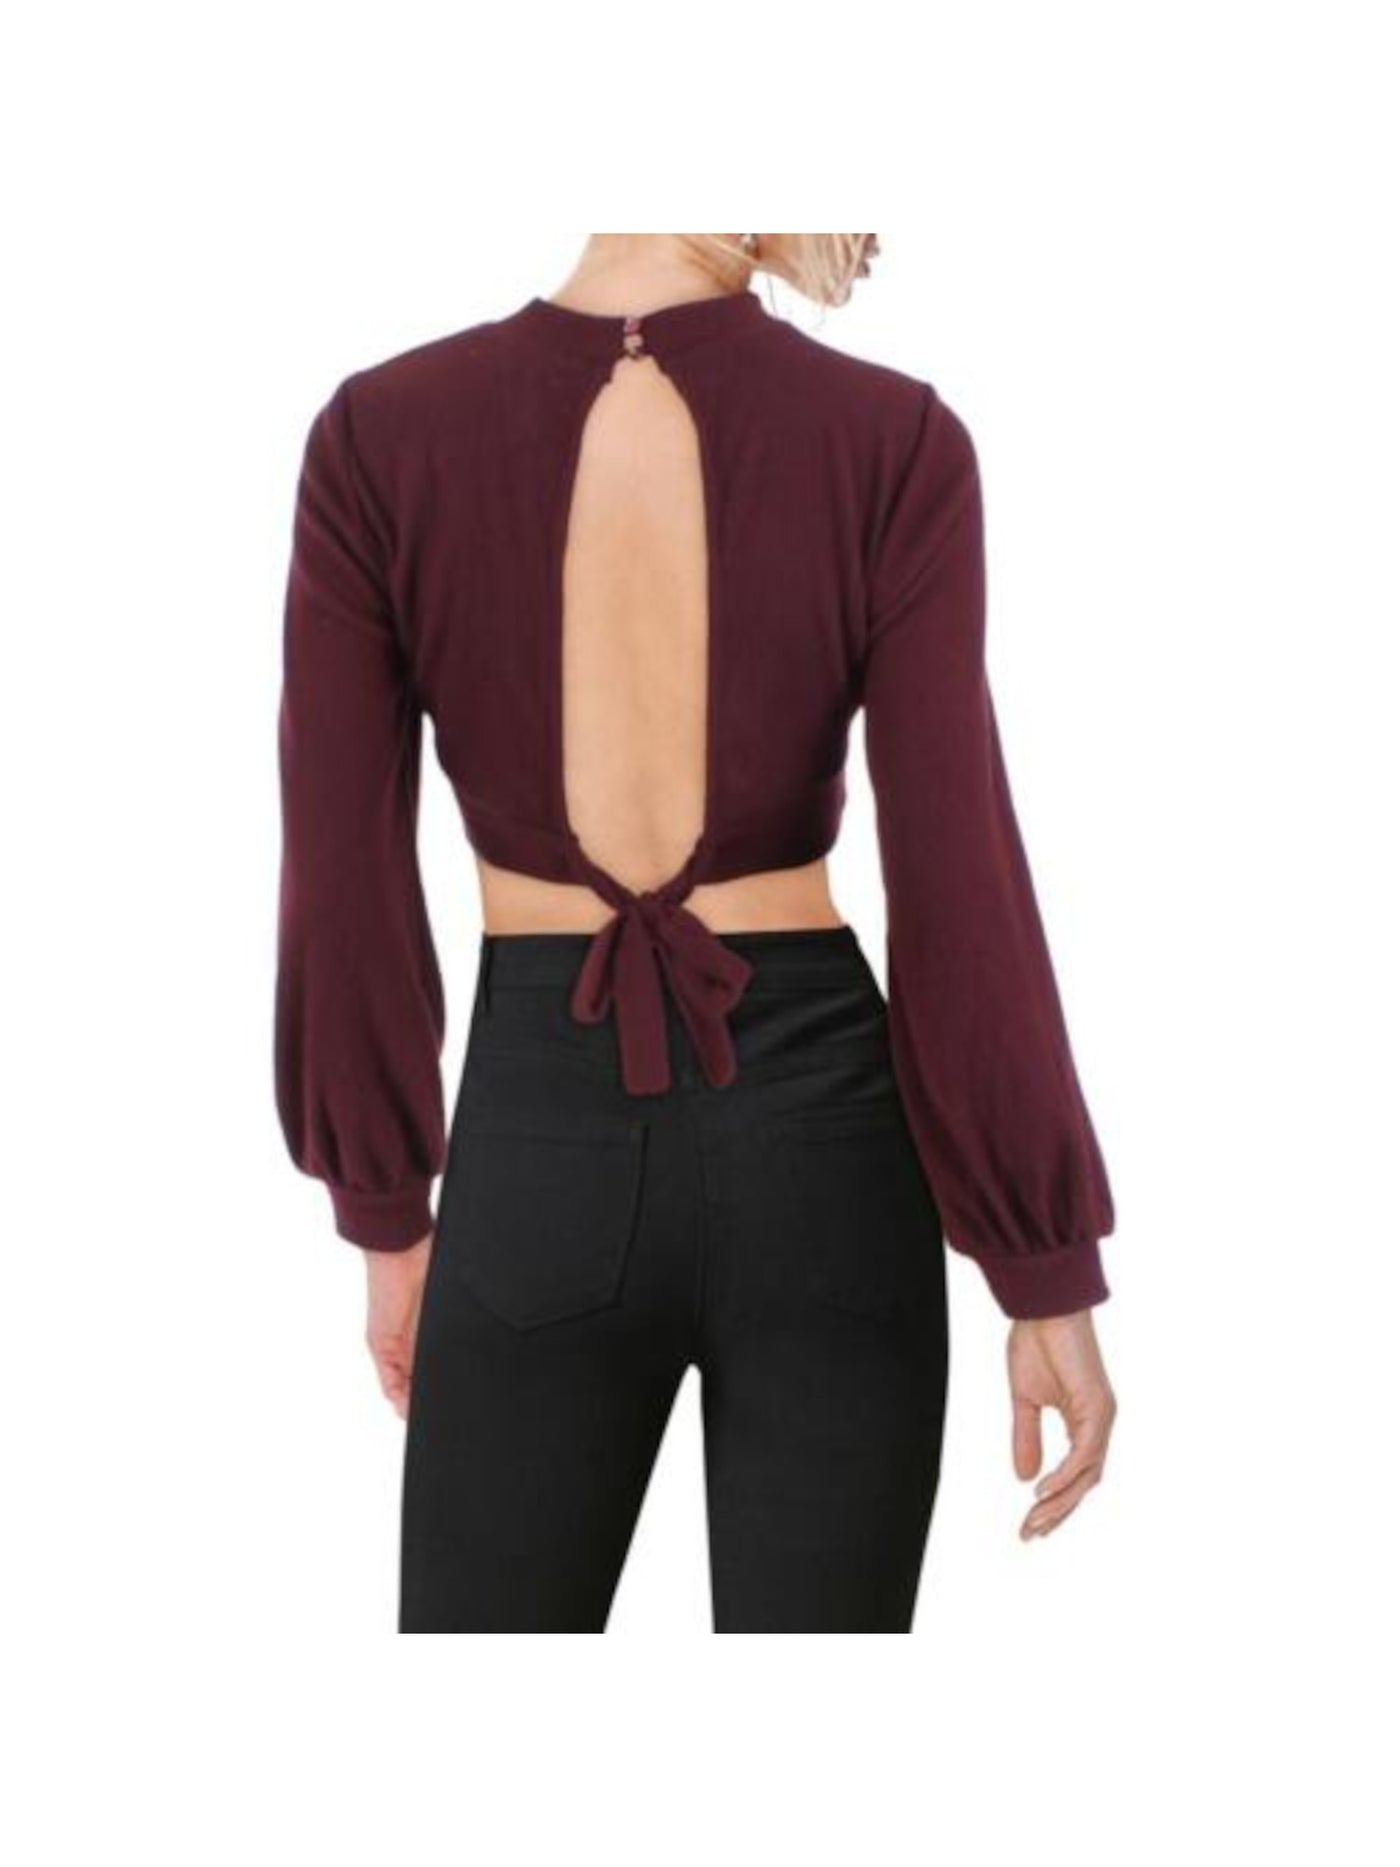 ALMOST FAMOUS Womens Burgundy Ribbed Cut Out Button Neck Open Tie Back Balloon Sleeve Mock Neck Crop Top Sweater Juniors XL